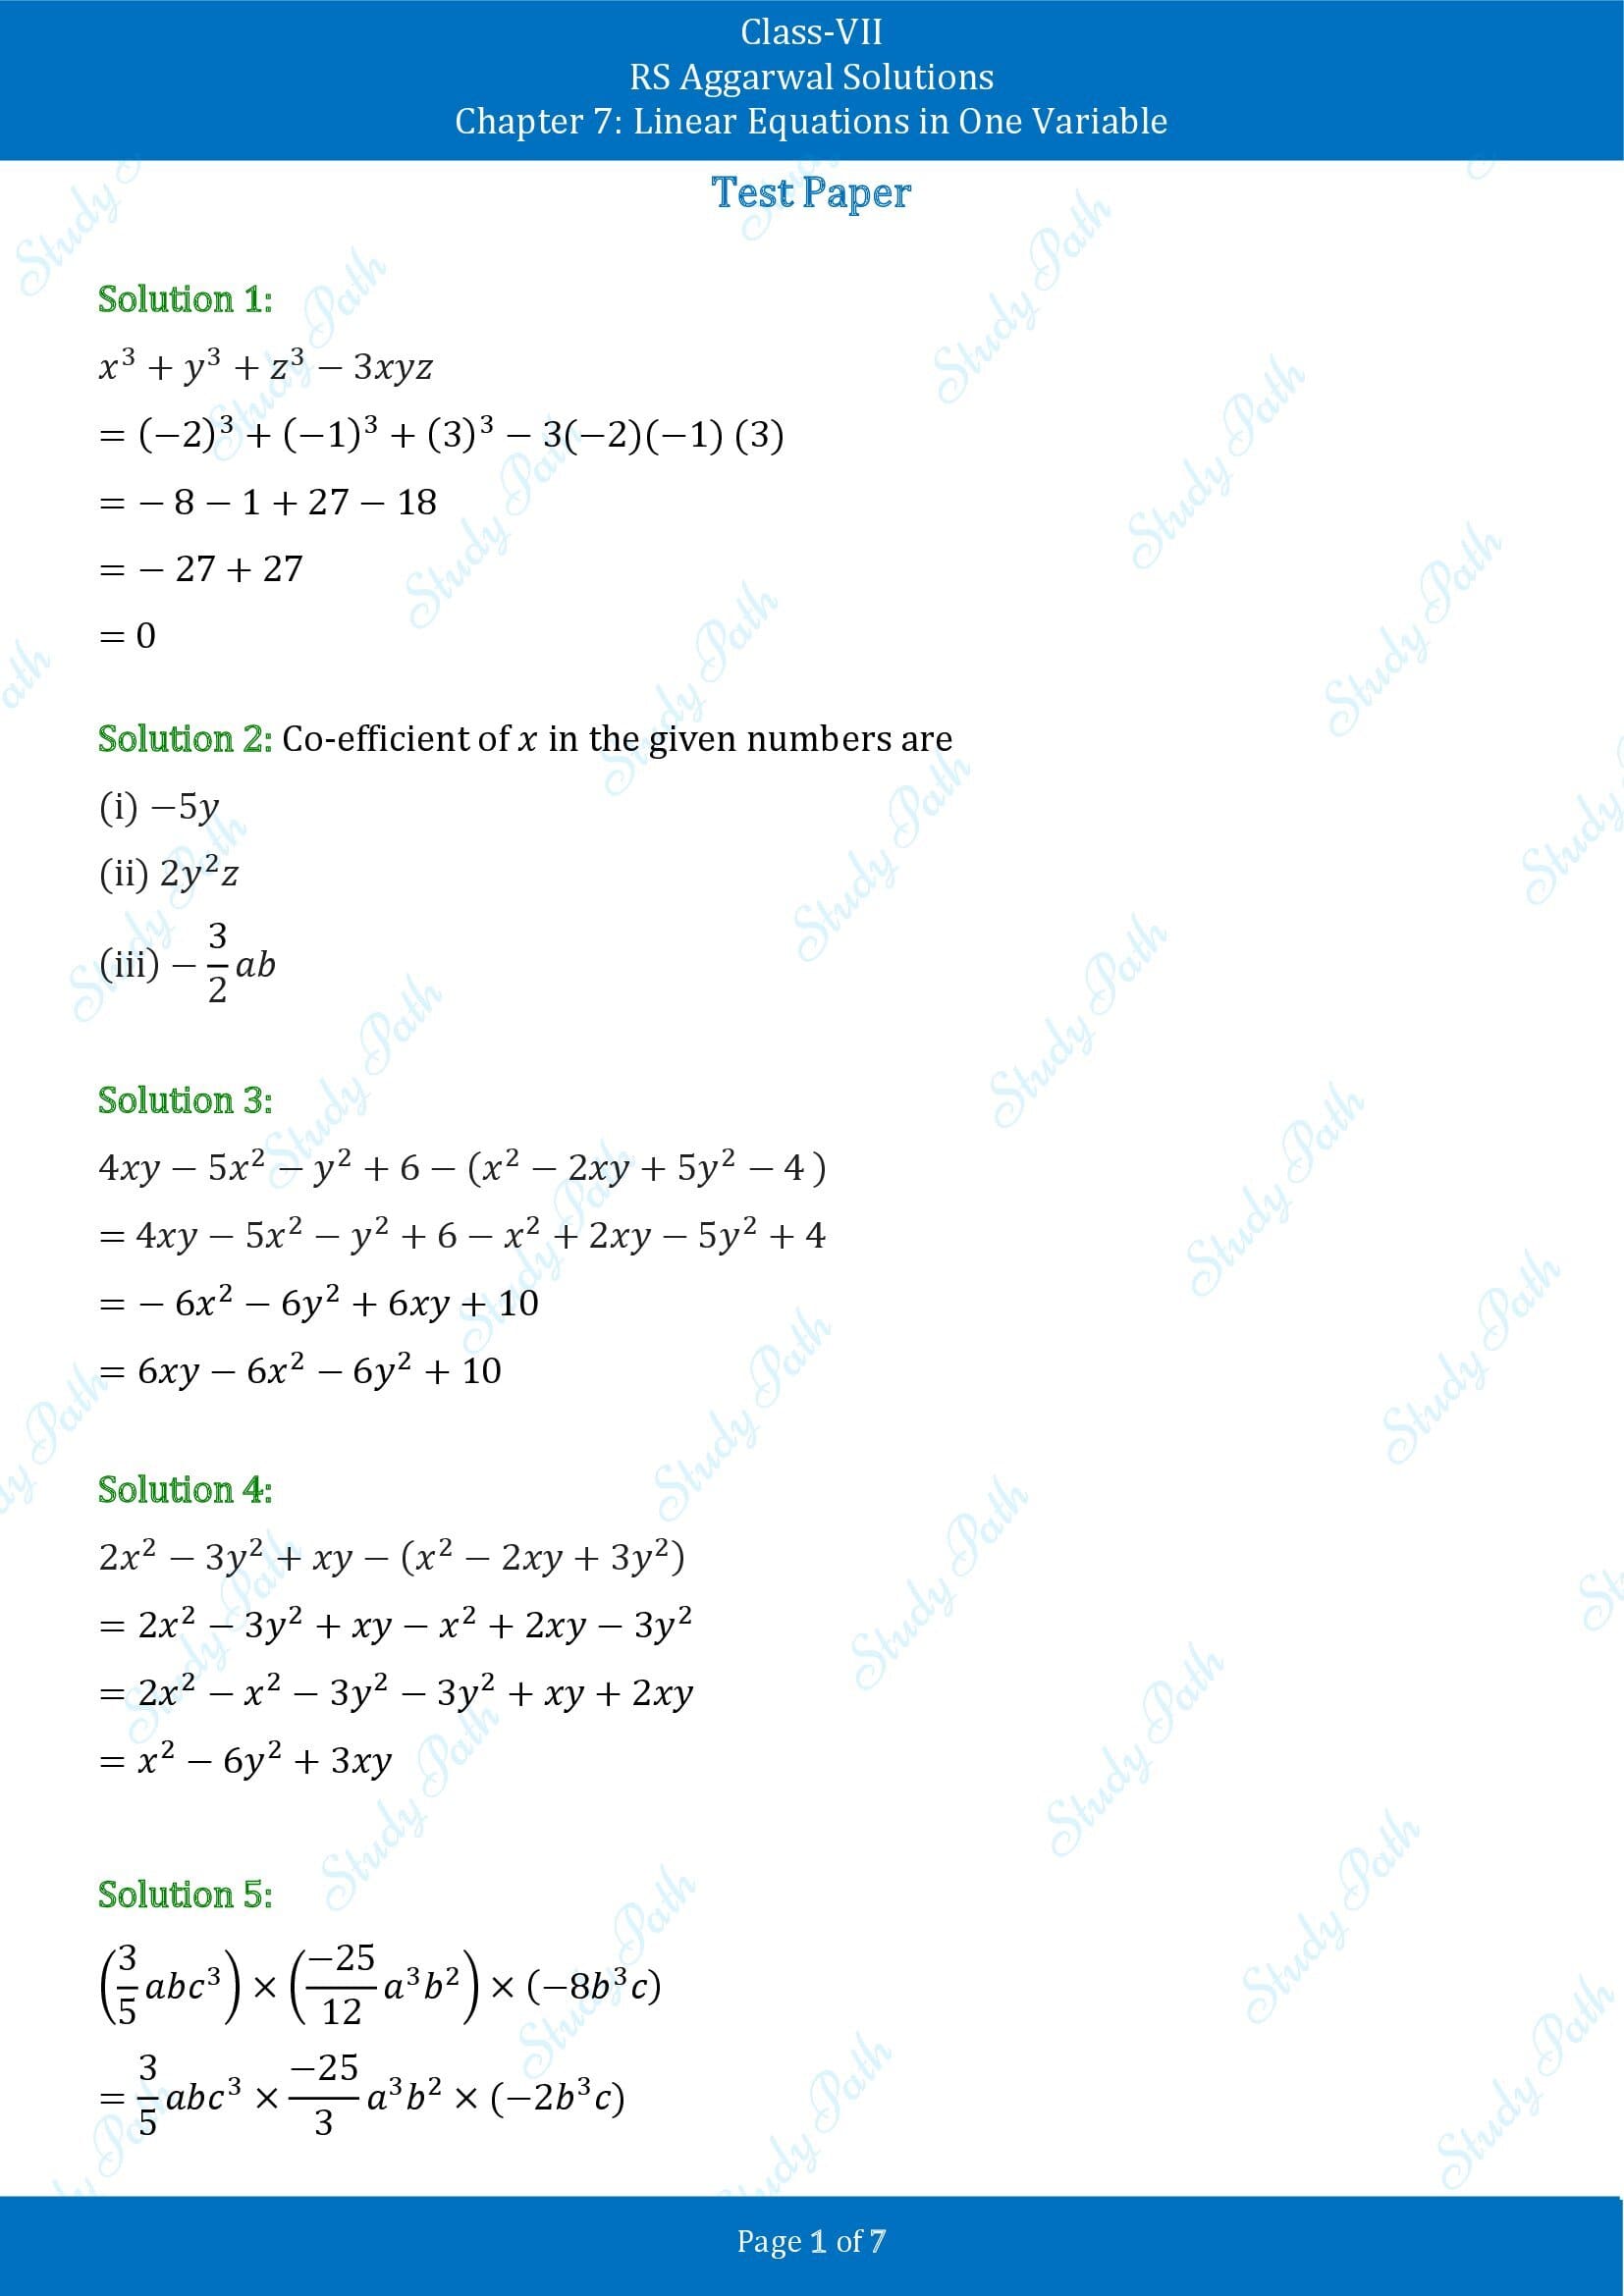 RS Aggarwal Solutions Class 7 Chapter 7 Linear Equations in One Variable Test Paper 00001